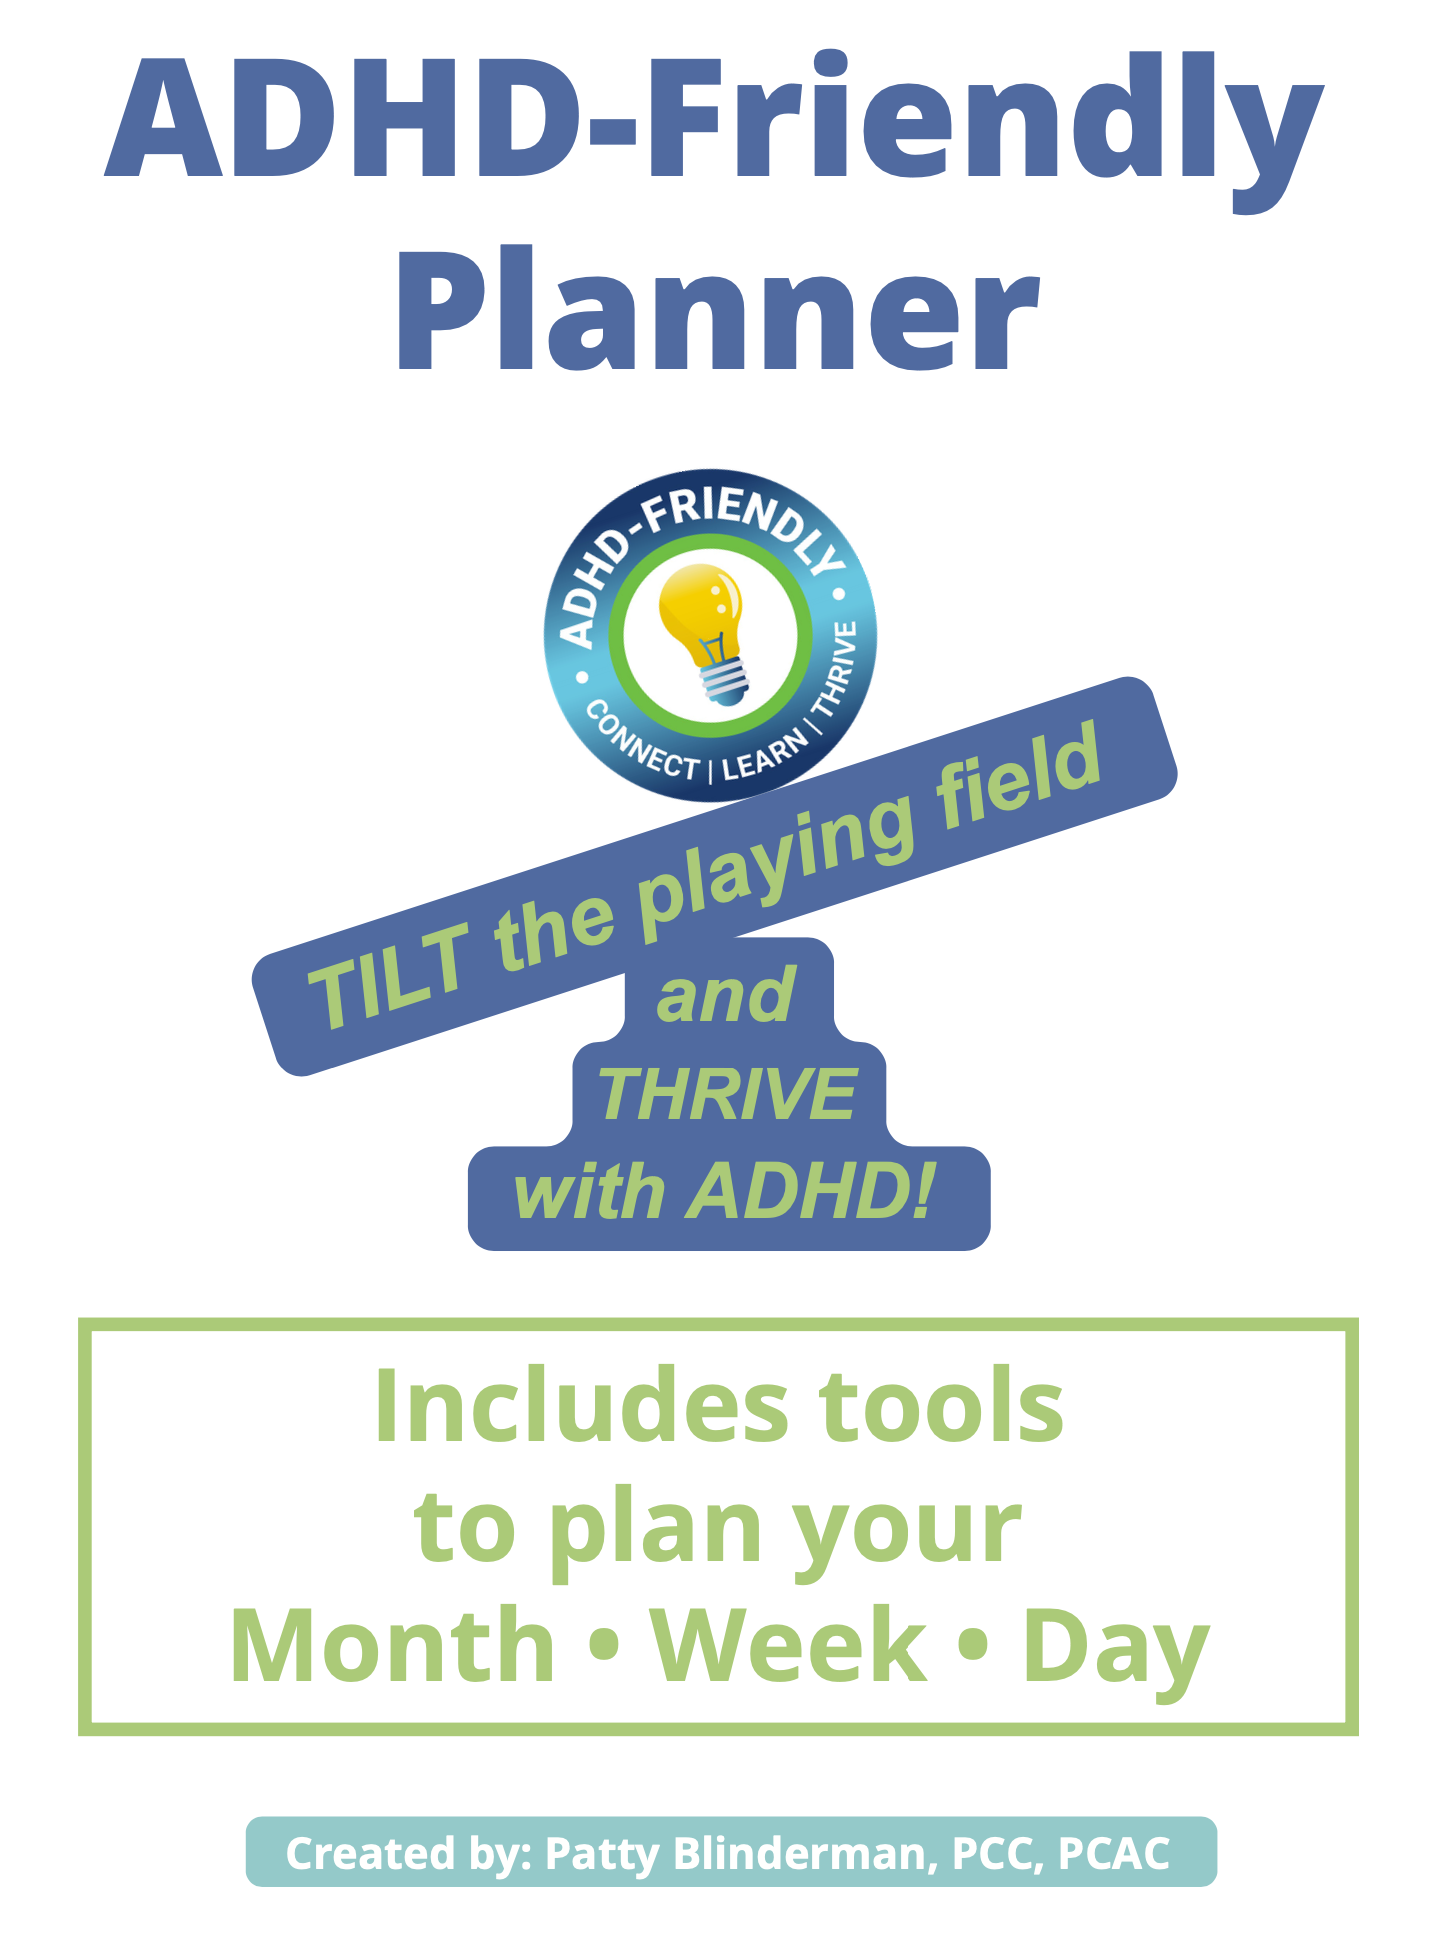 ADHD-Friendly Planner Graphic